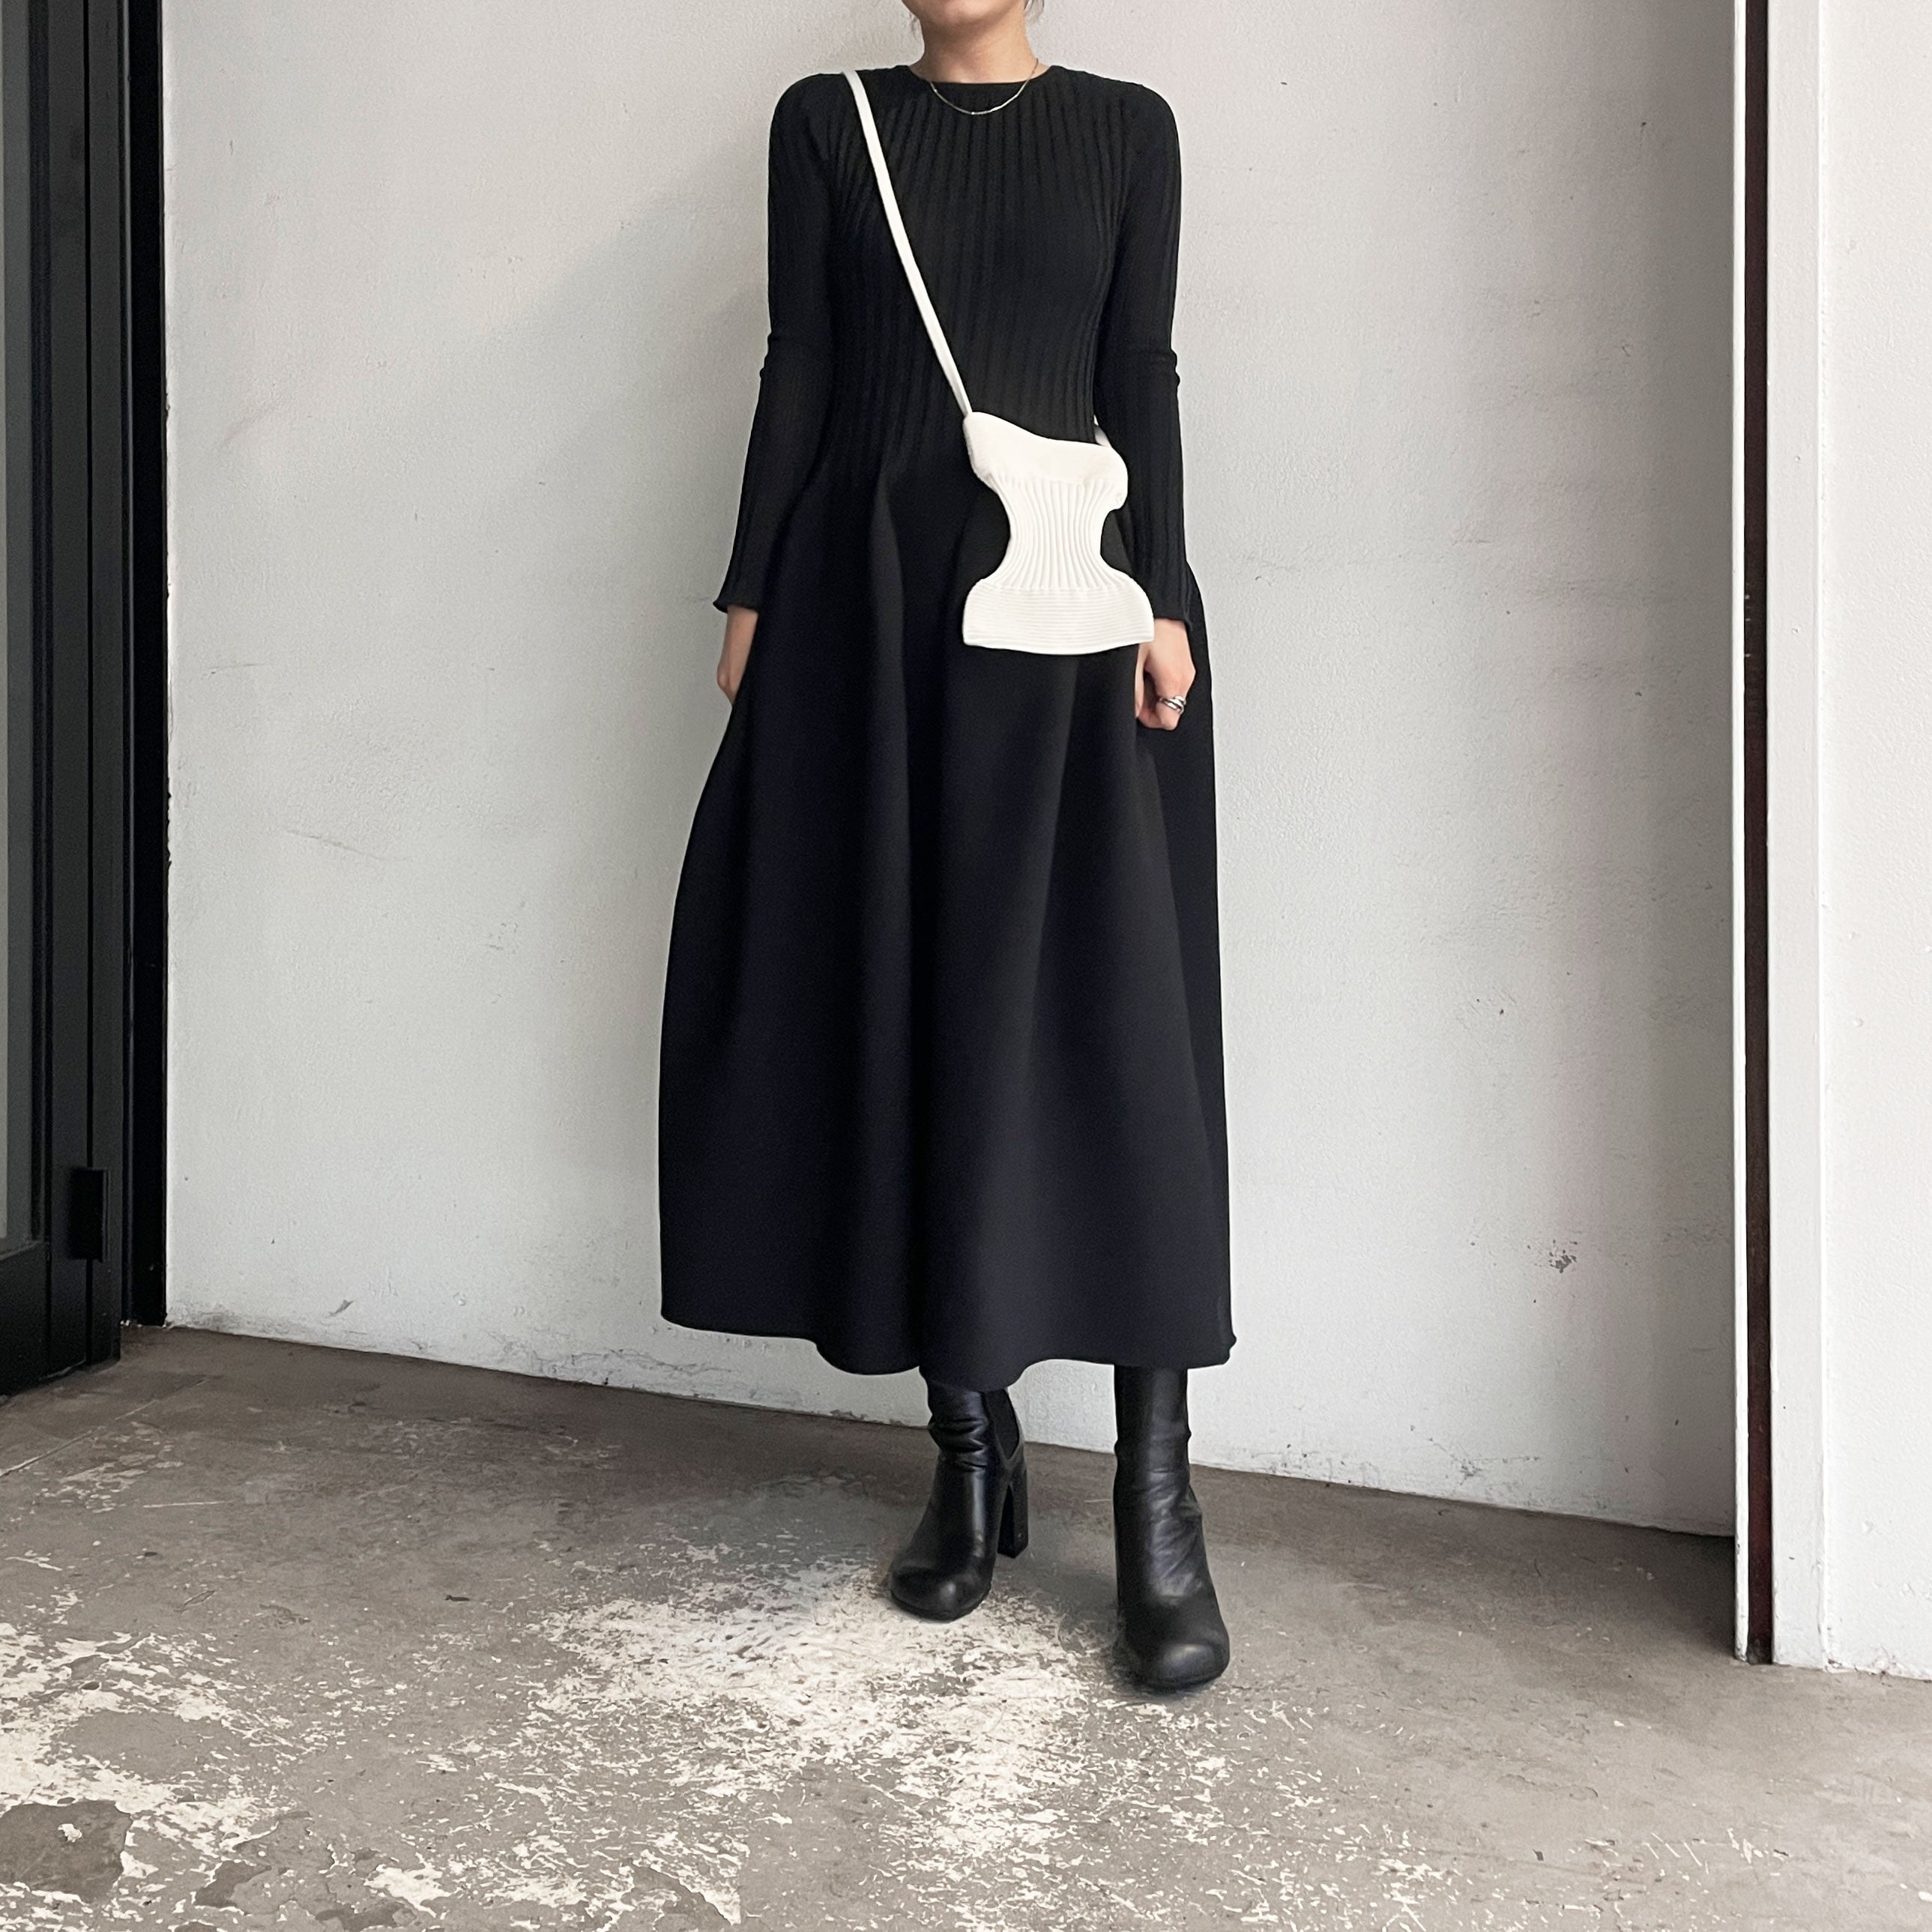 CFCL】 POTTERY DRESS 2 / STRATA SACOCHE 3 – ONENESS ONLINE STORE